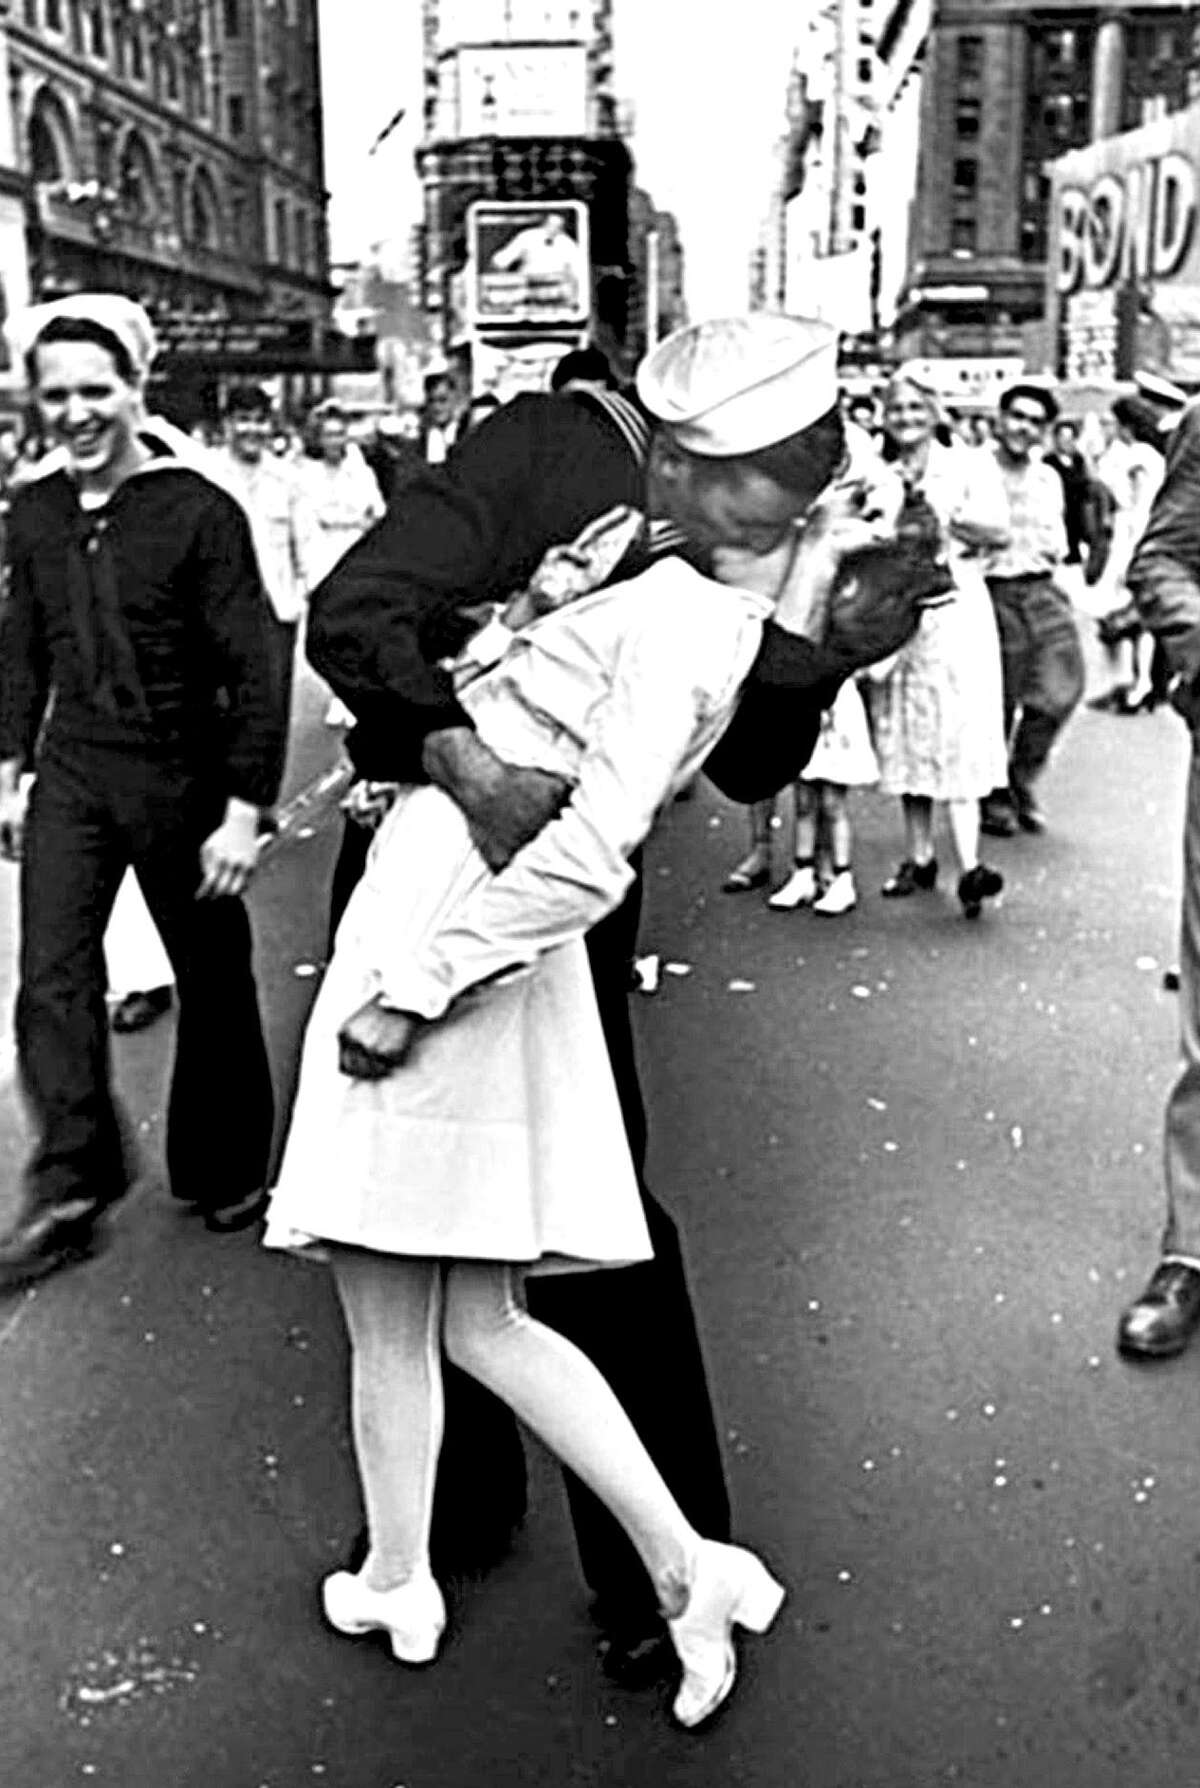 Man Known As Kissing Sailor In Wwii Era Image Dies